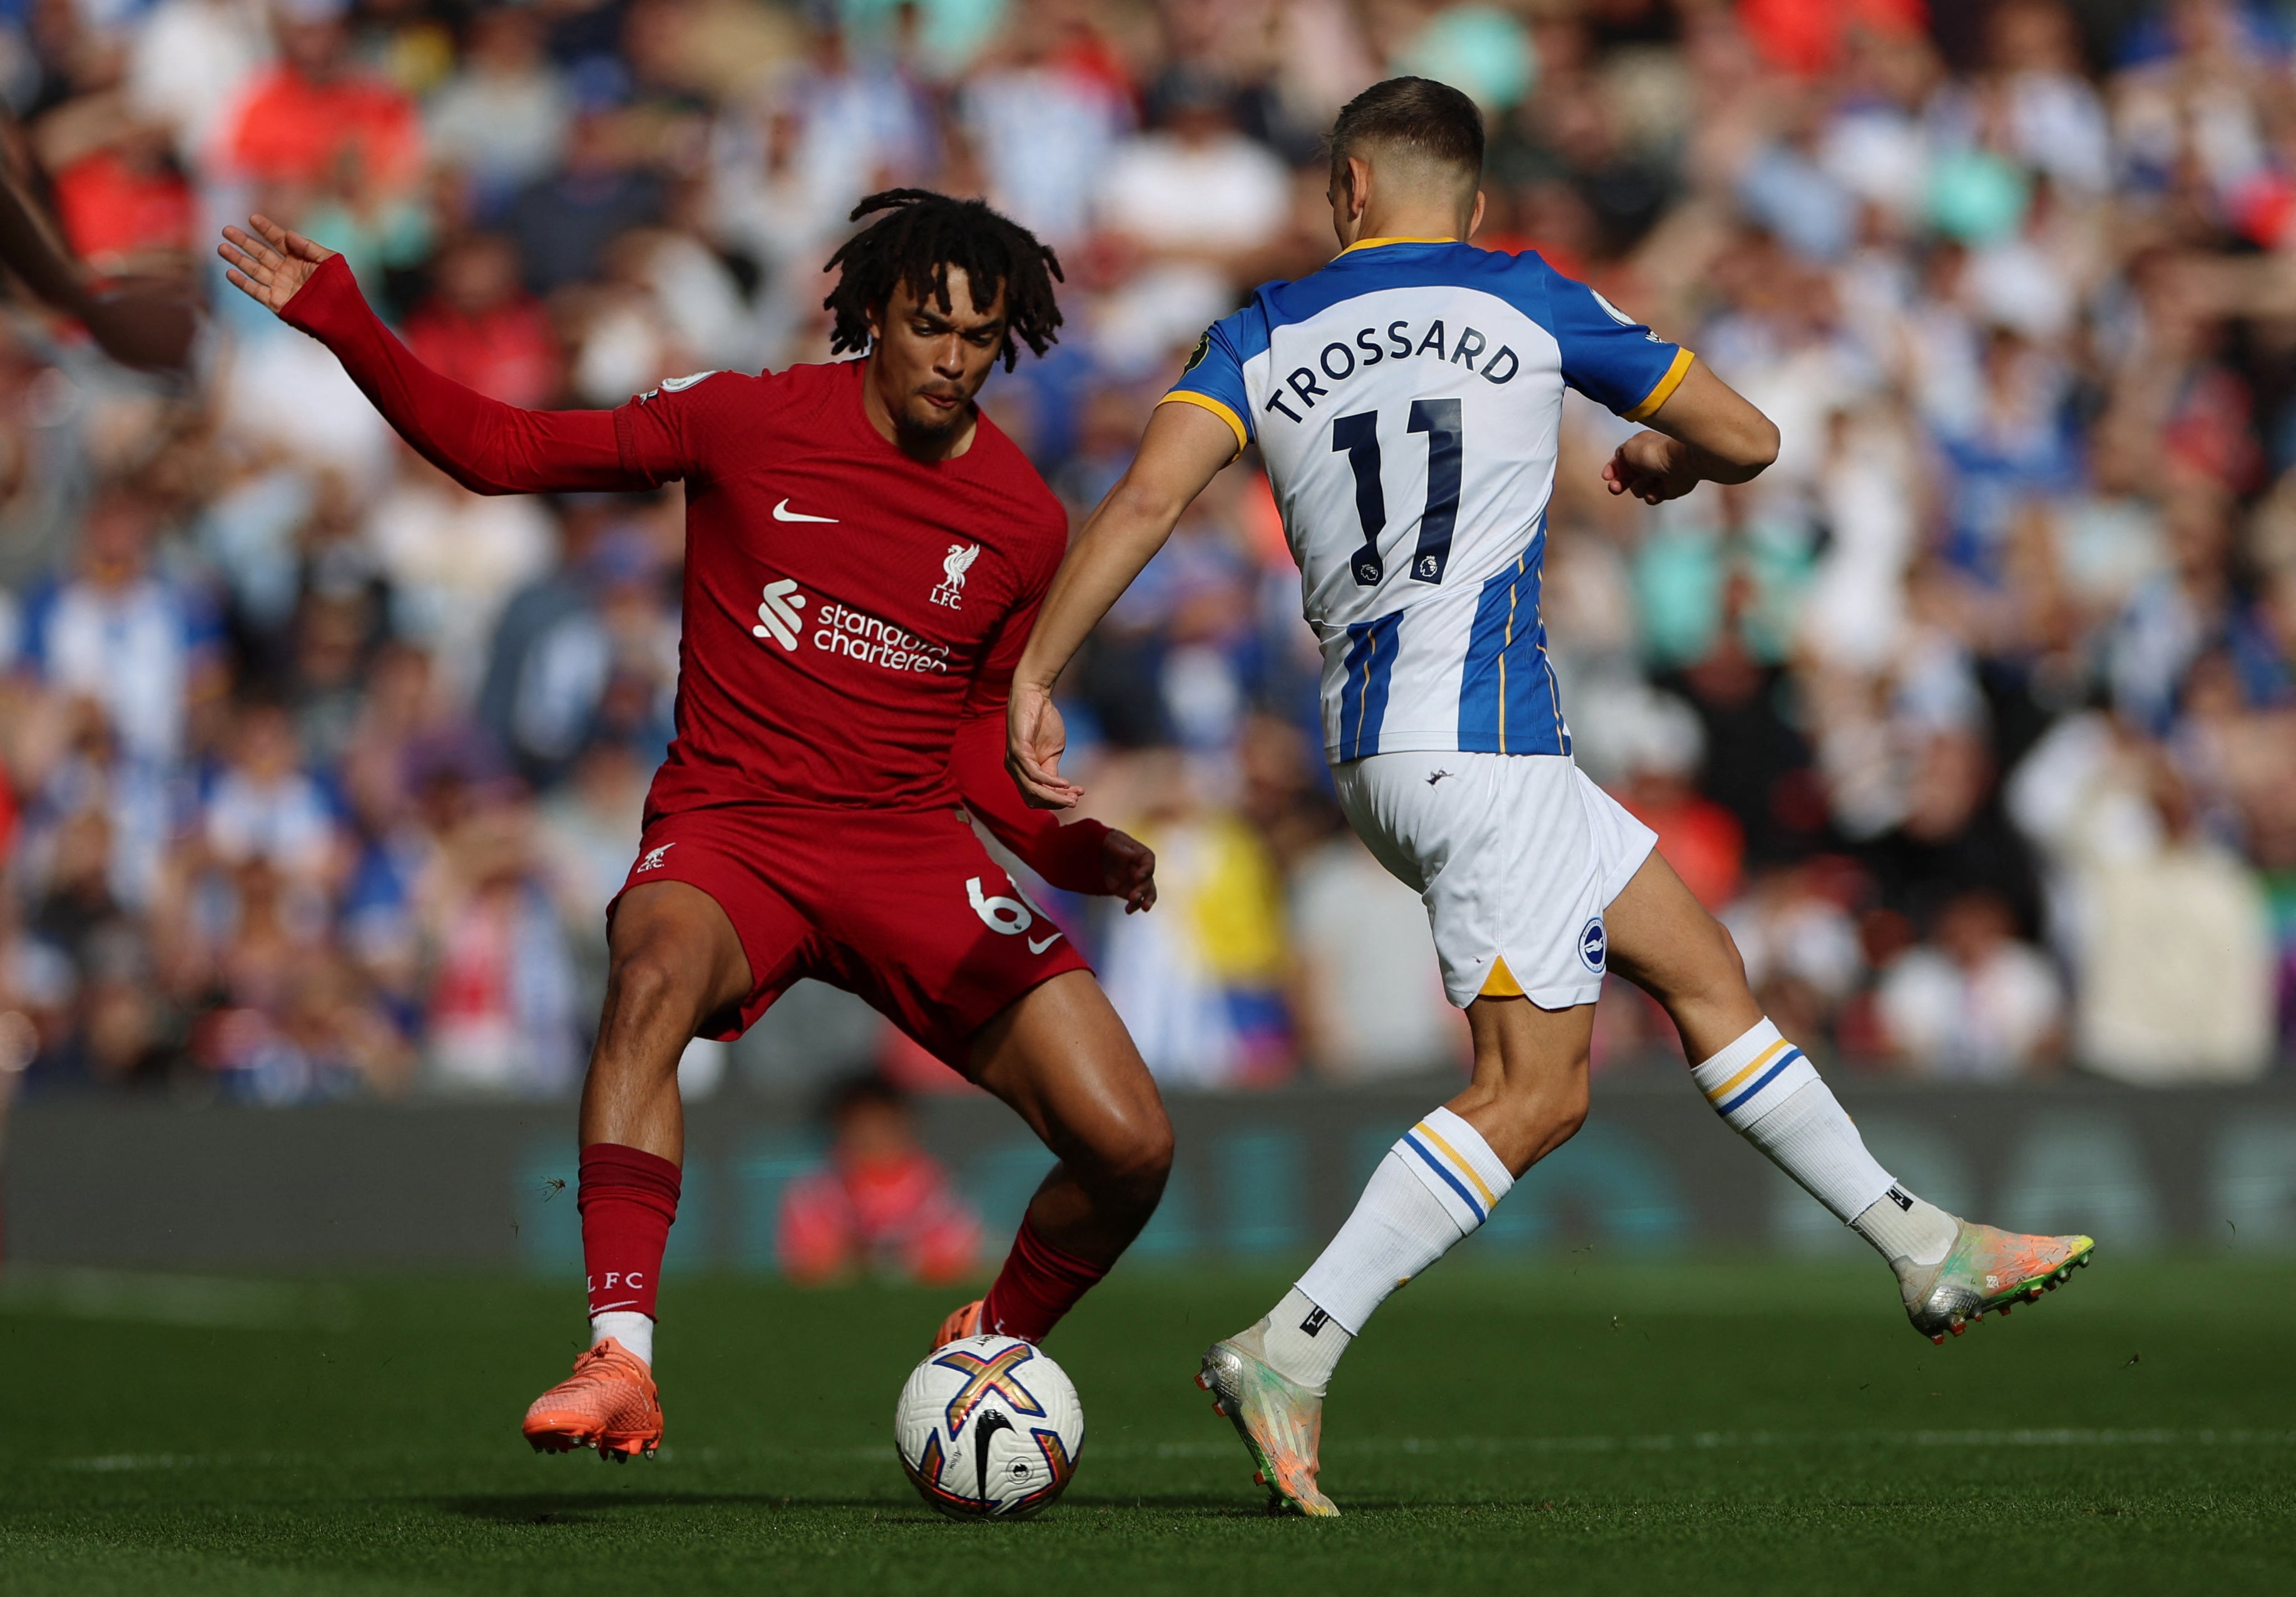 Liverpool Vs Brighton And Hove Albion Live Premier League Result Final Score And Reaction The 